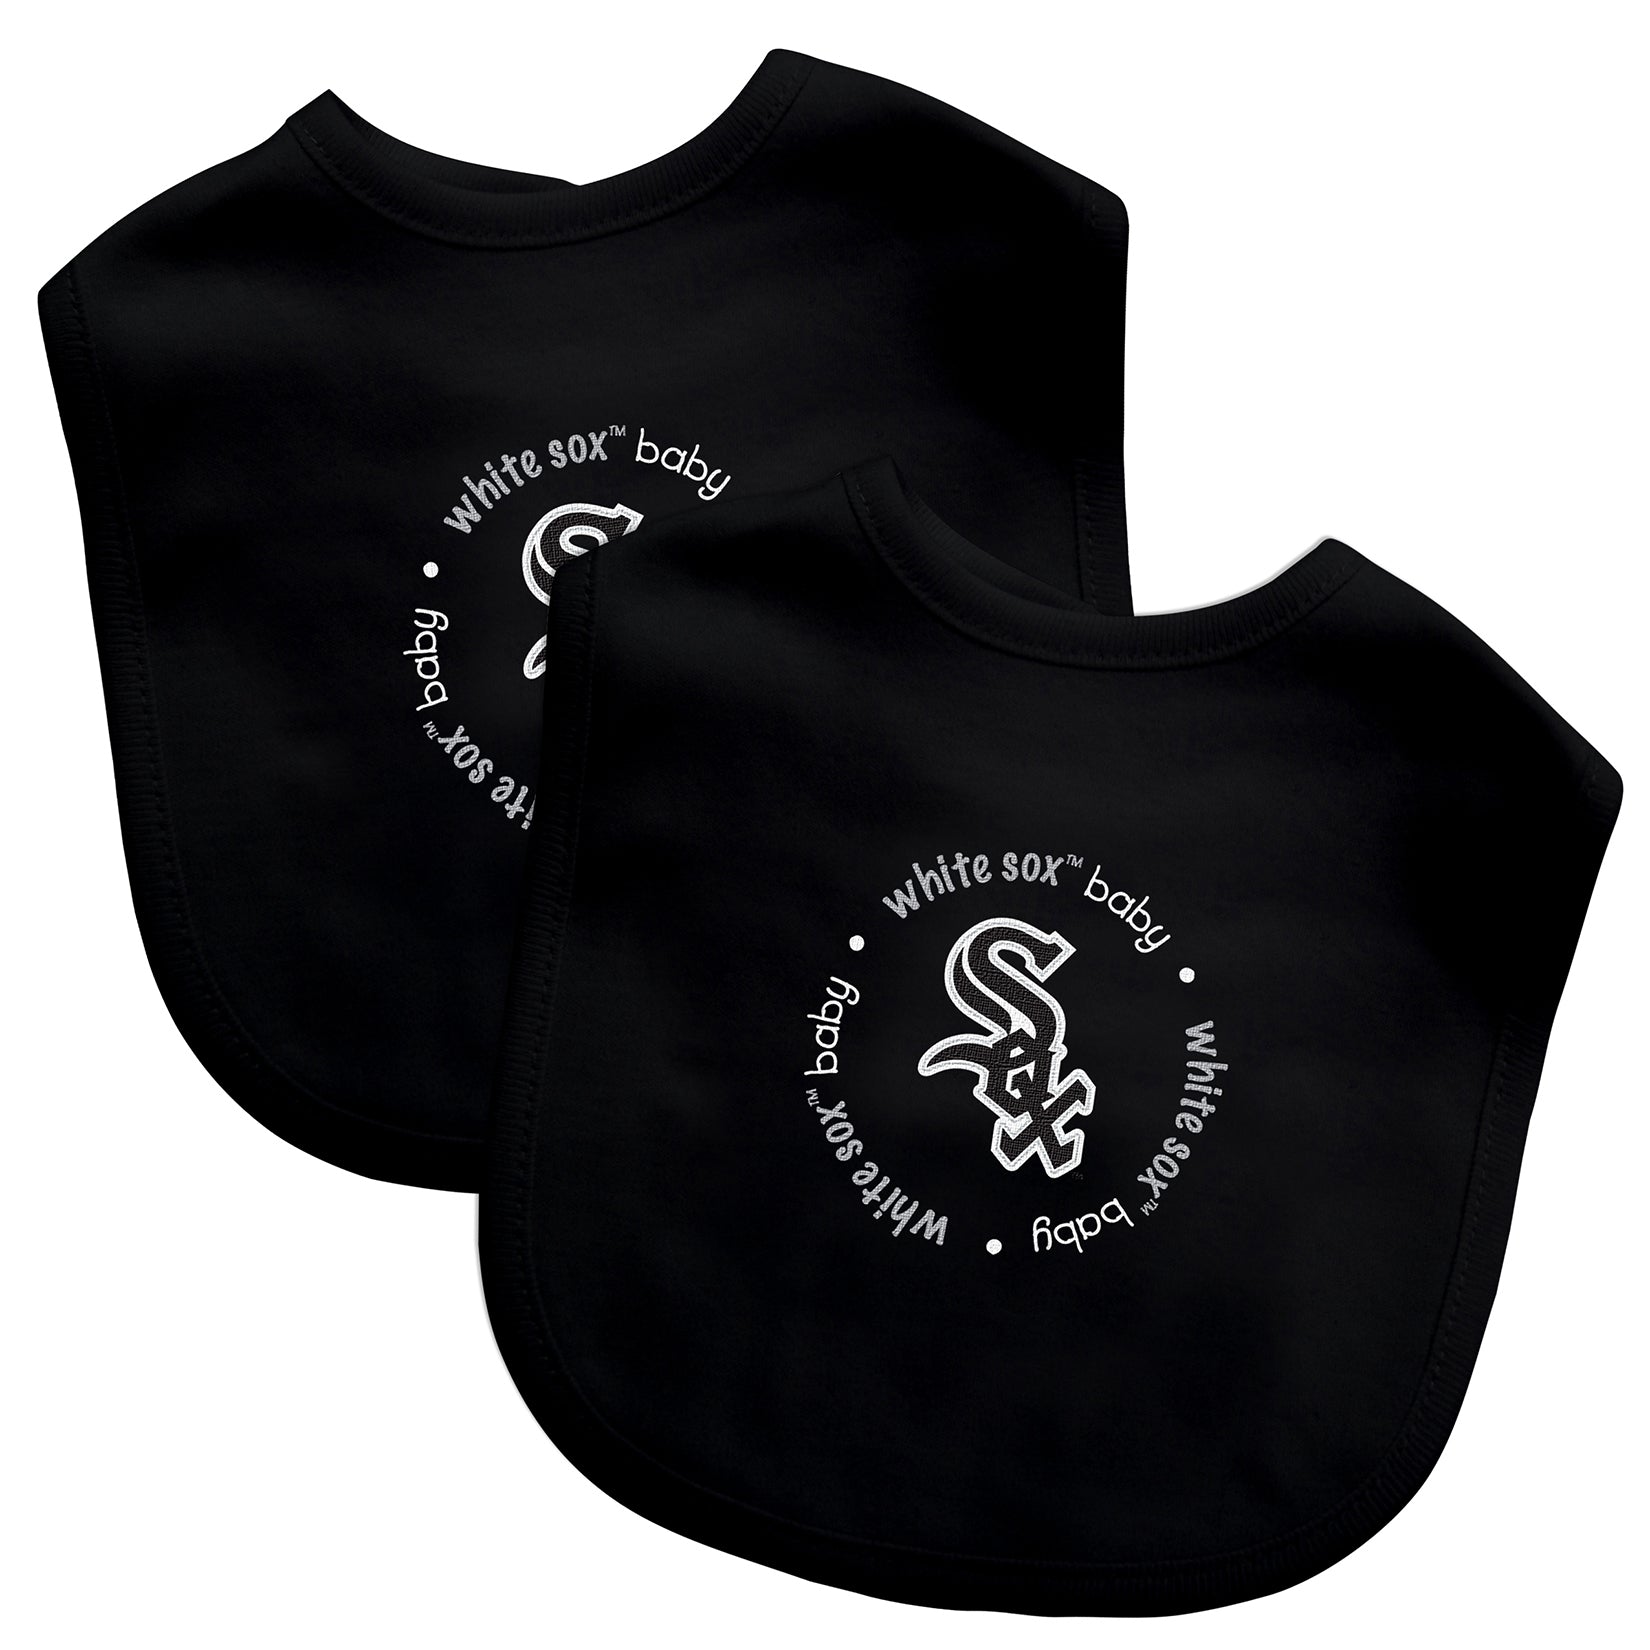 Chicago White Sox Baby Bibs 2-Pack